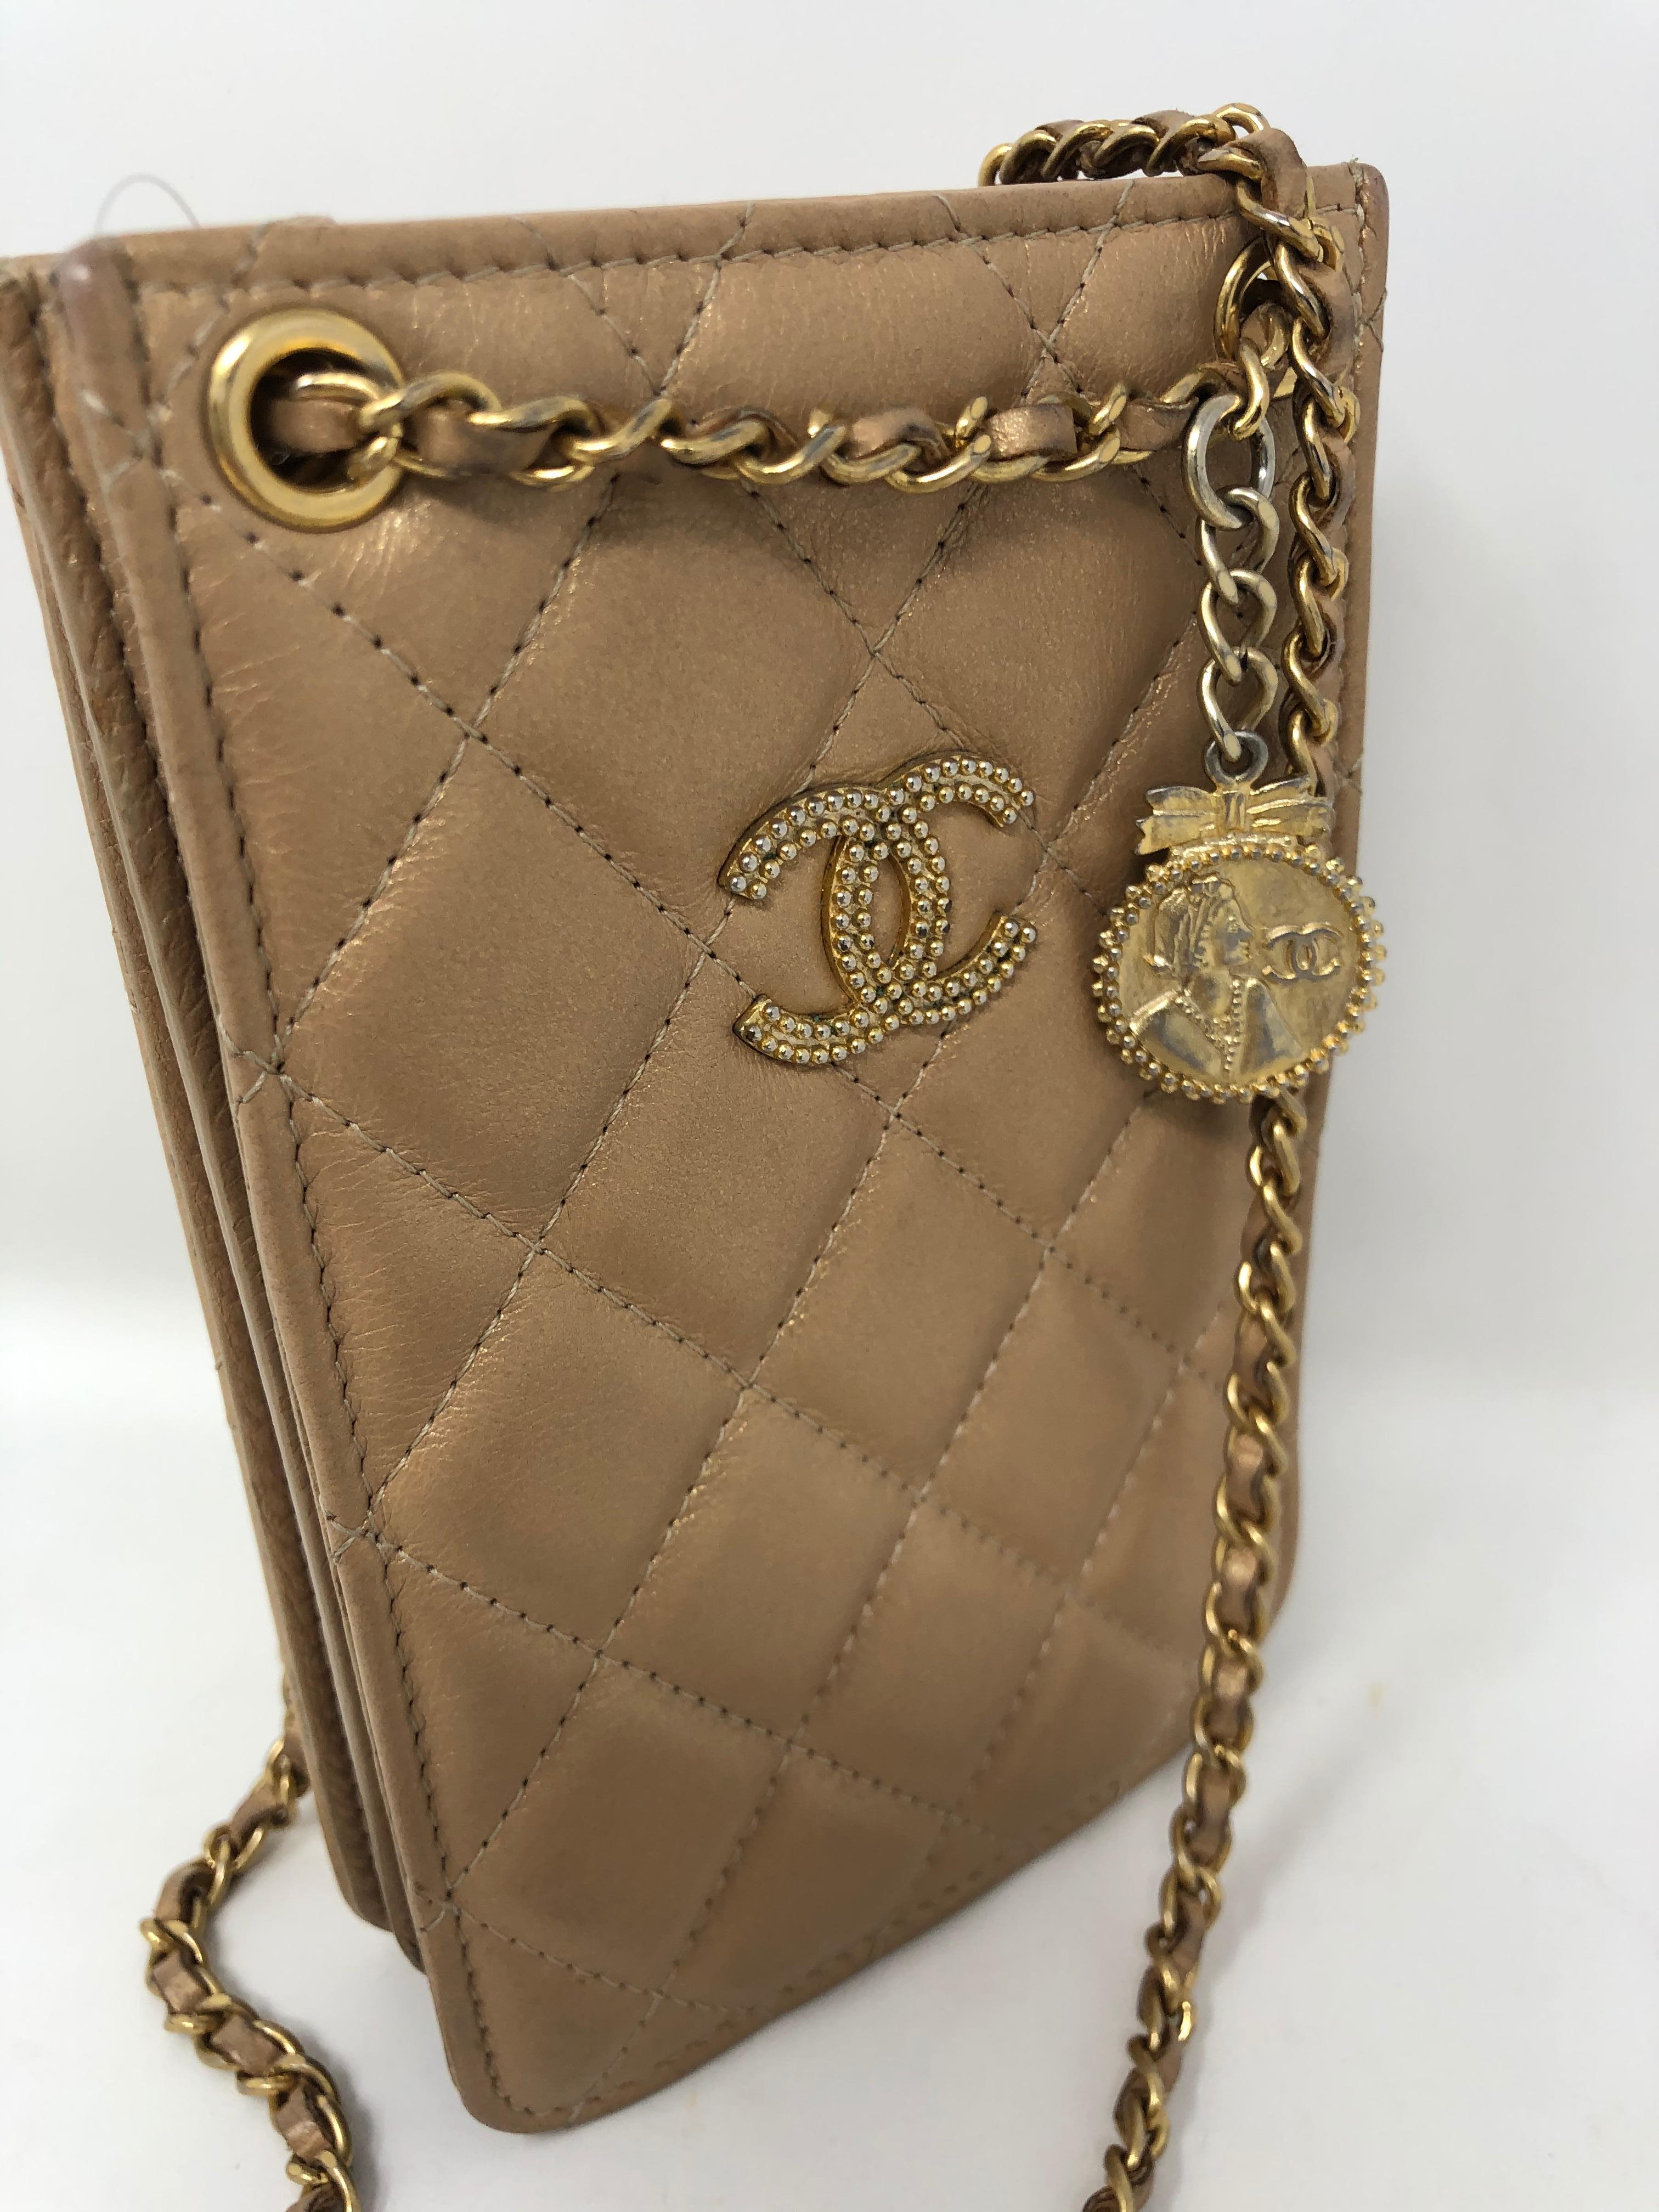 Chanel Mini Tan Camera/ small phone crossbody bag. Goldish tan color with gold hardware. Like new condition. Unique look and style. Rare collector's piece. Guaranteed authentic. 